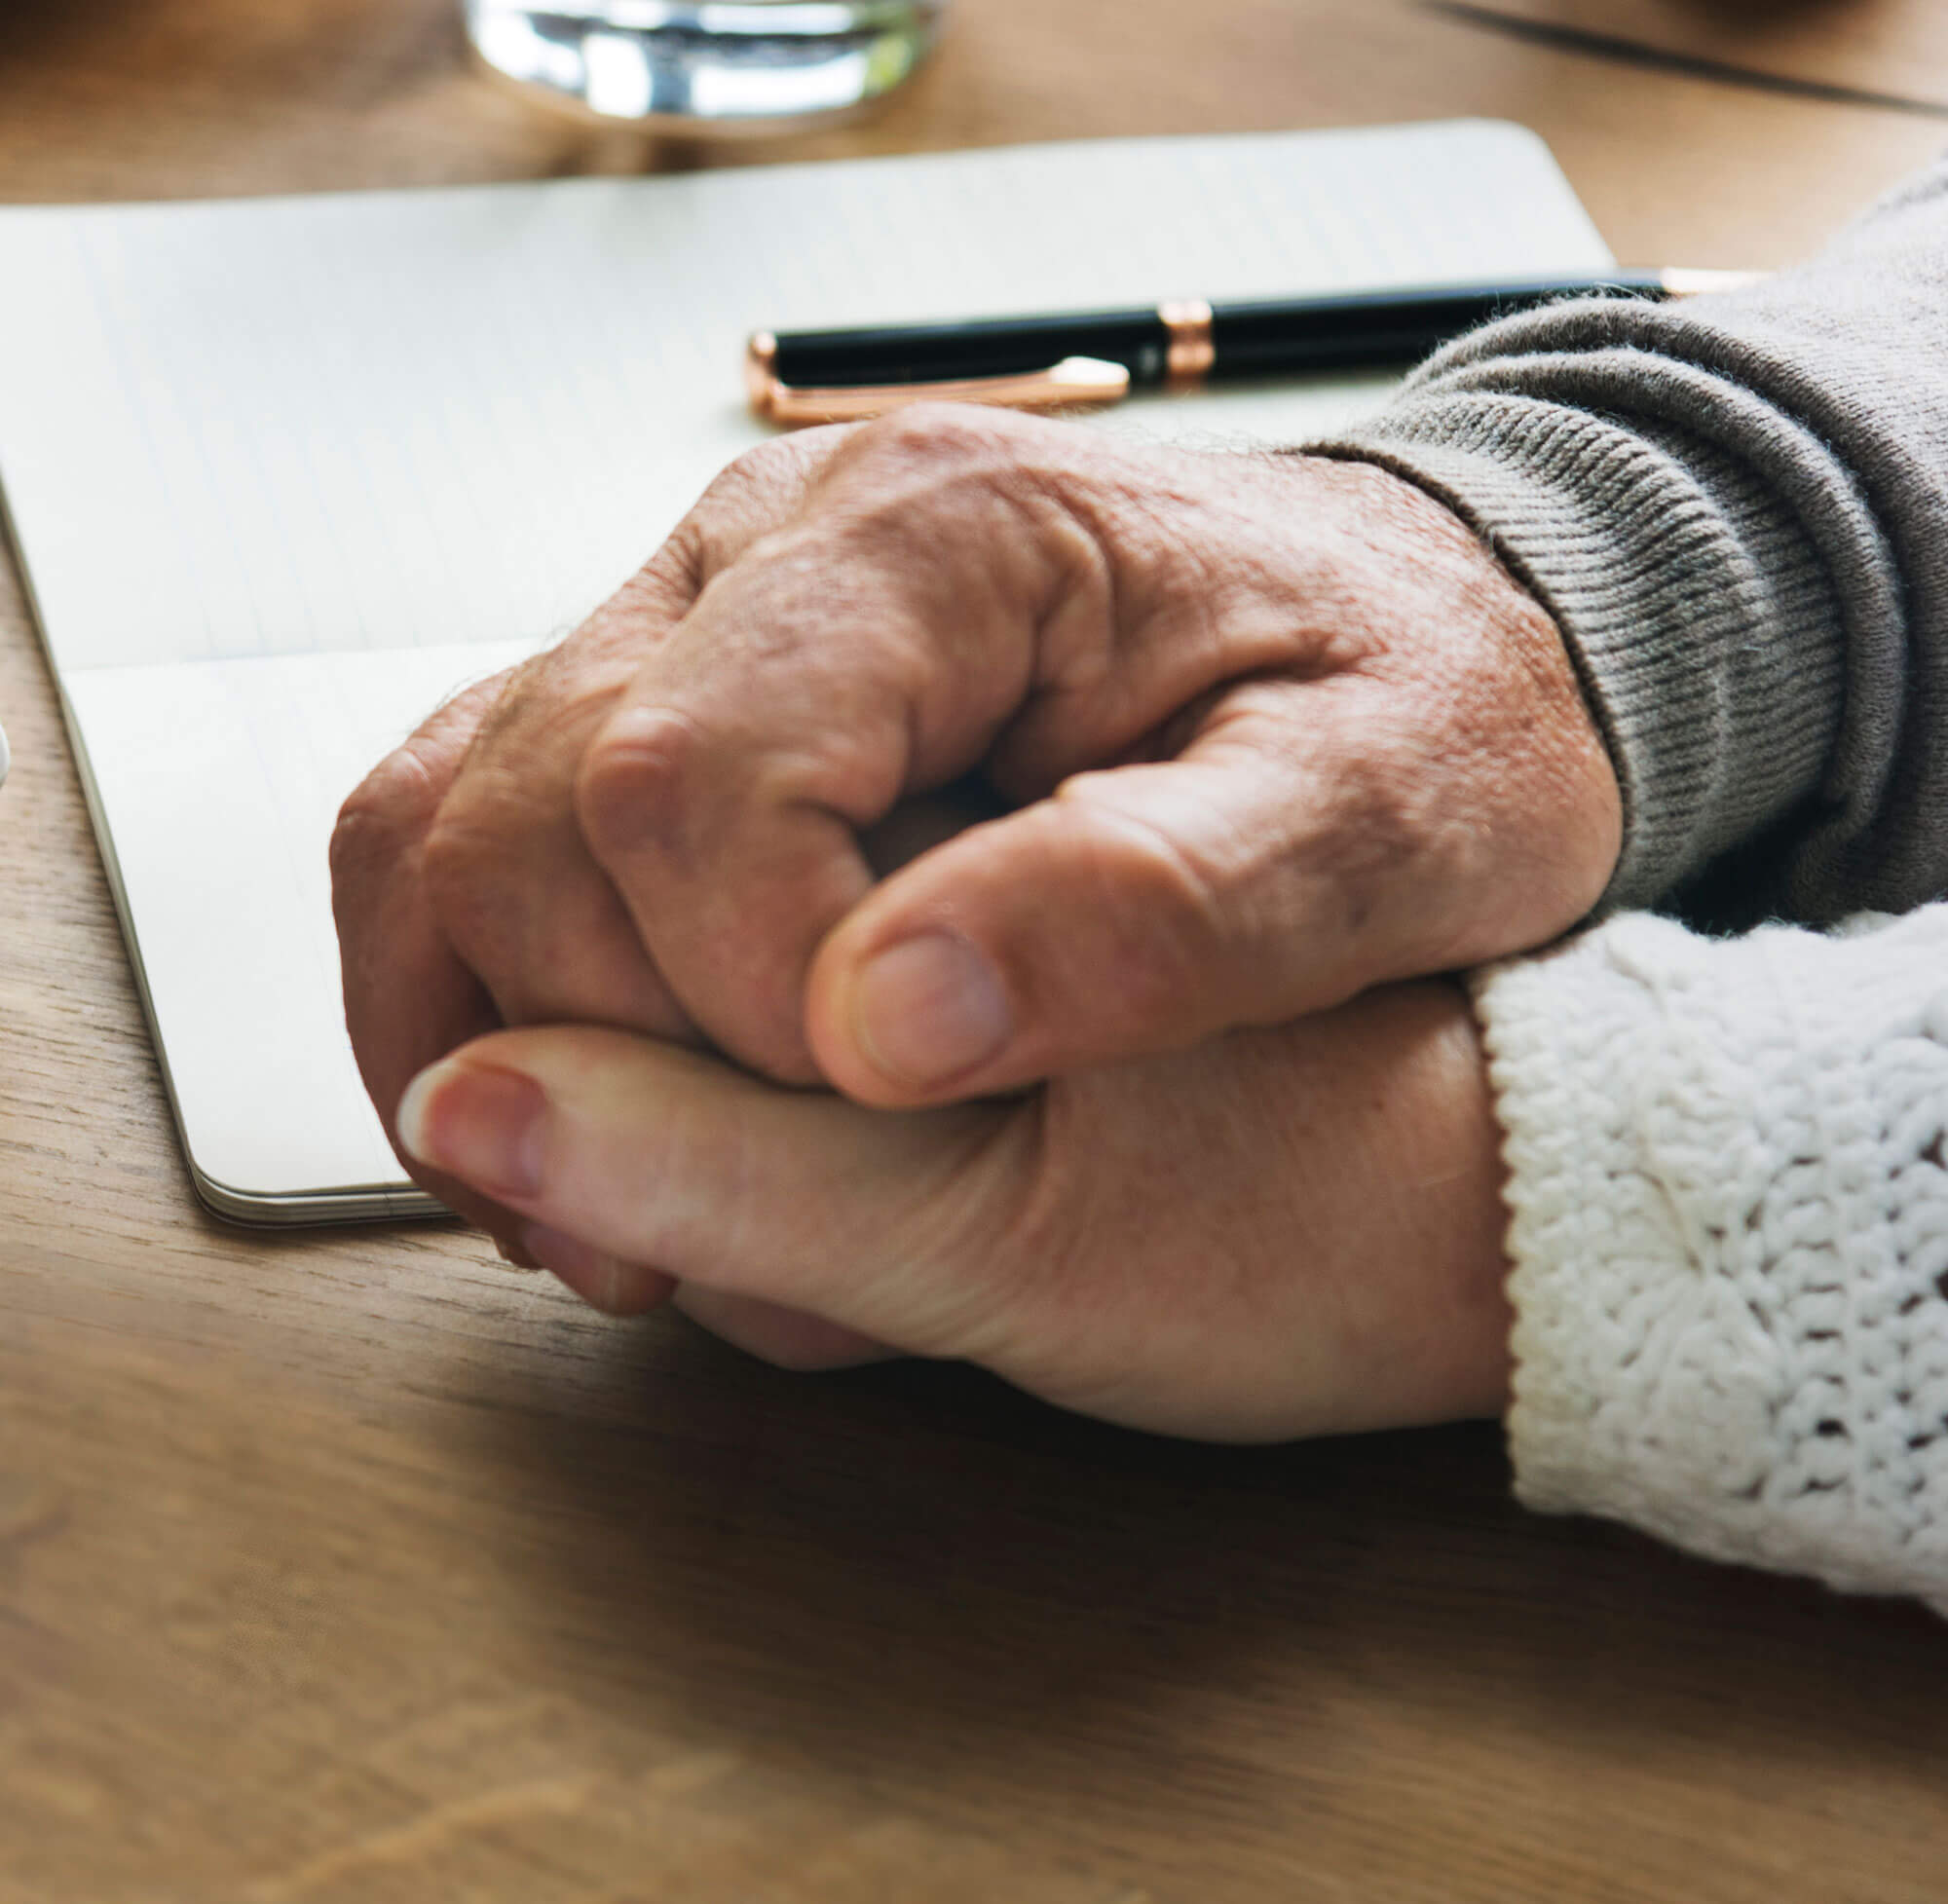 Elderly male and female hands holding each other over top of a note pad.